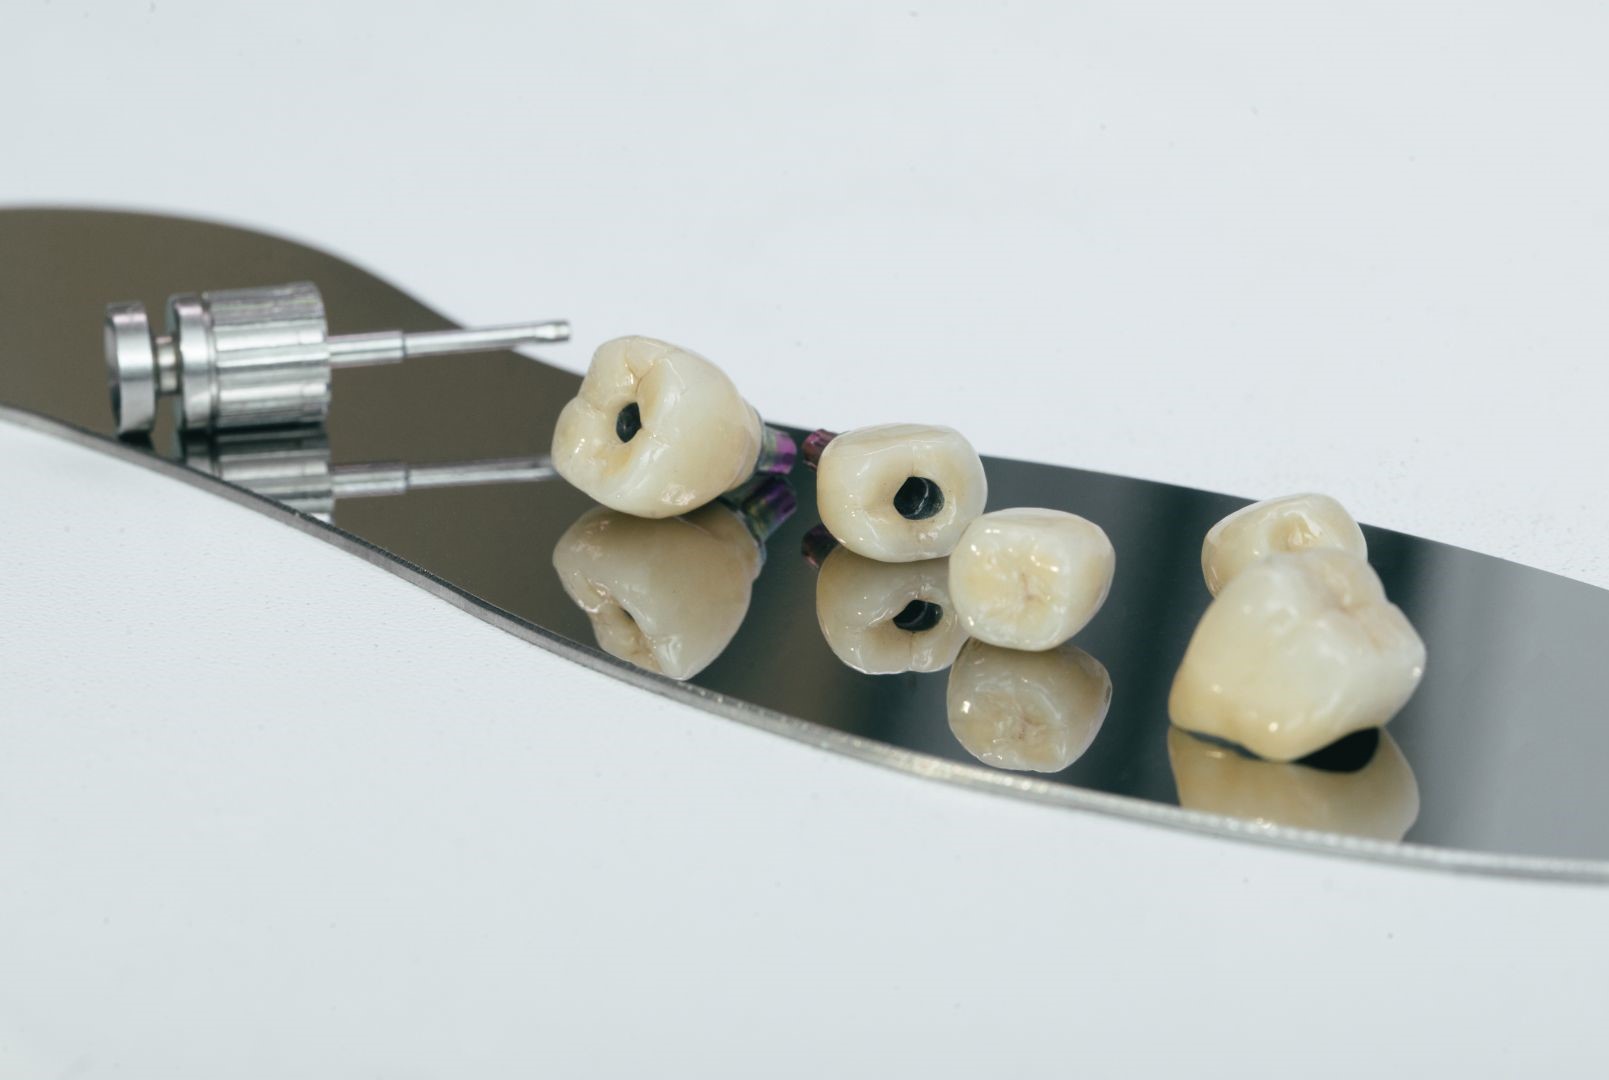 In which cases can zirconium crowns be done?